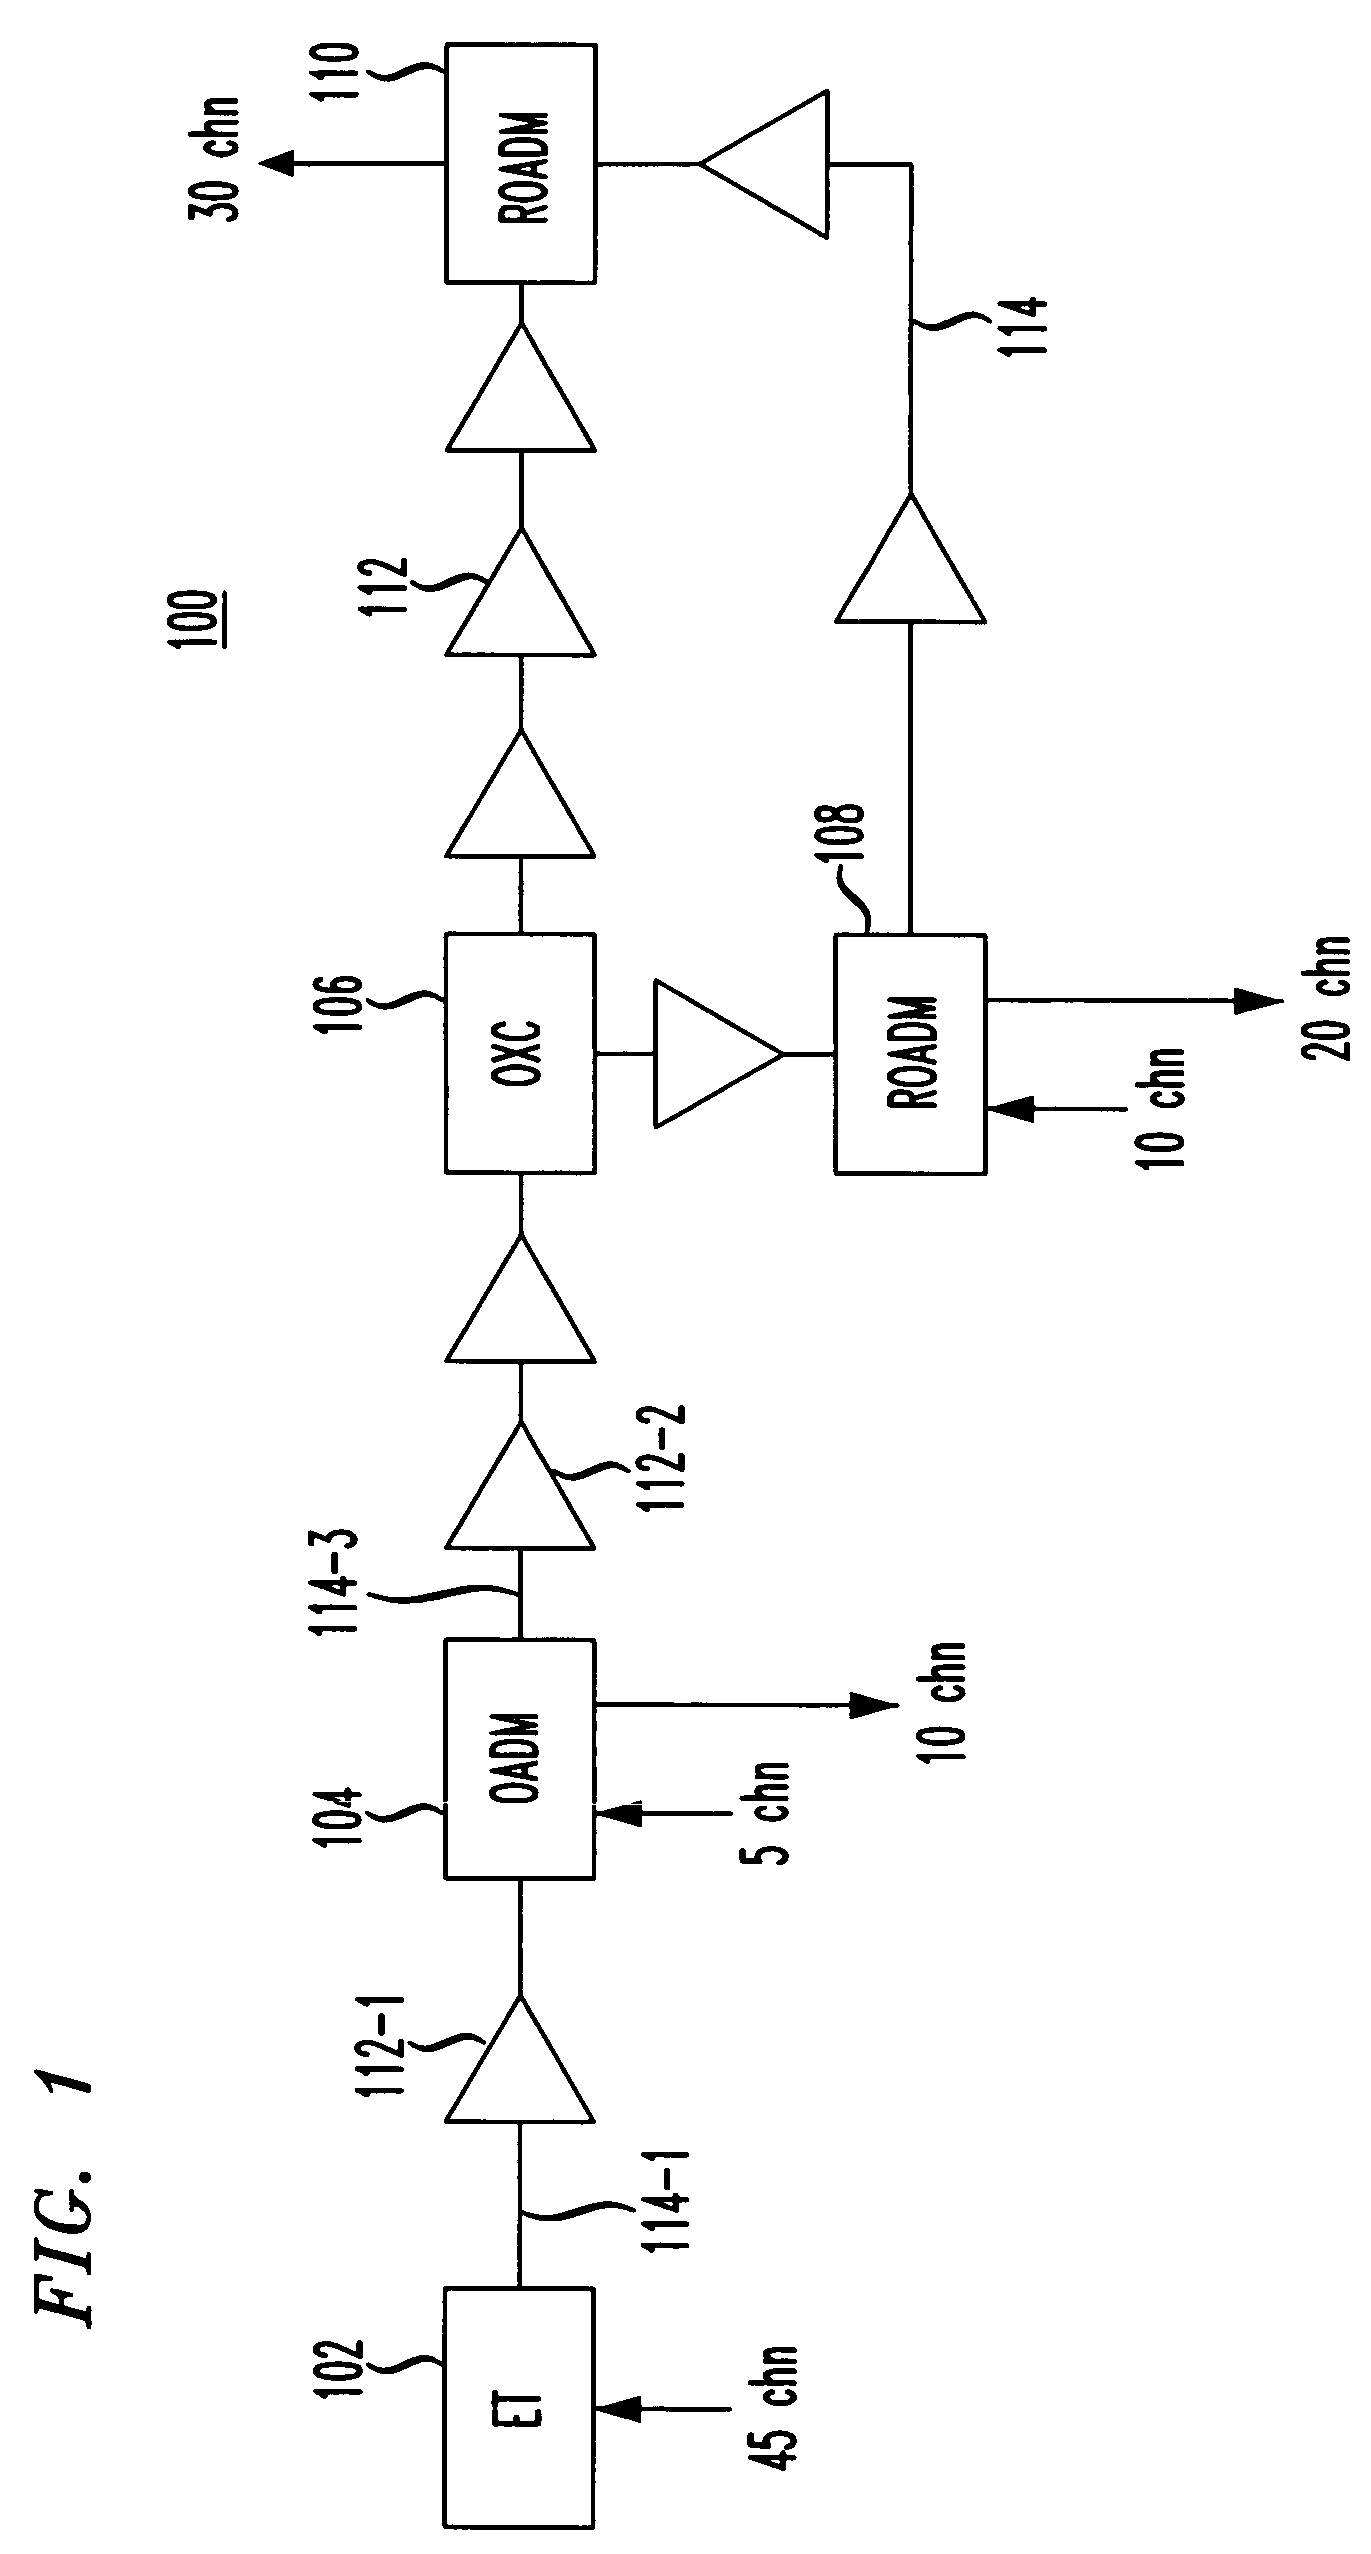 Transient-based channel growth for optical transmission systems